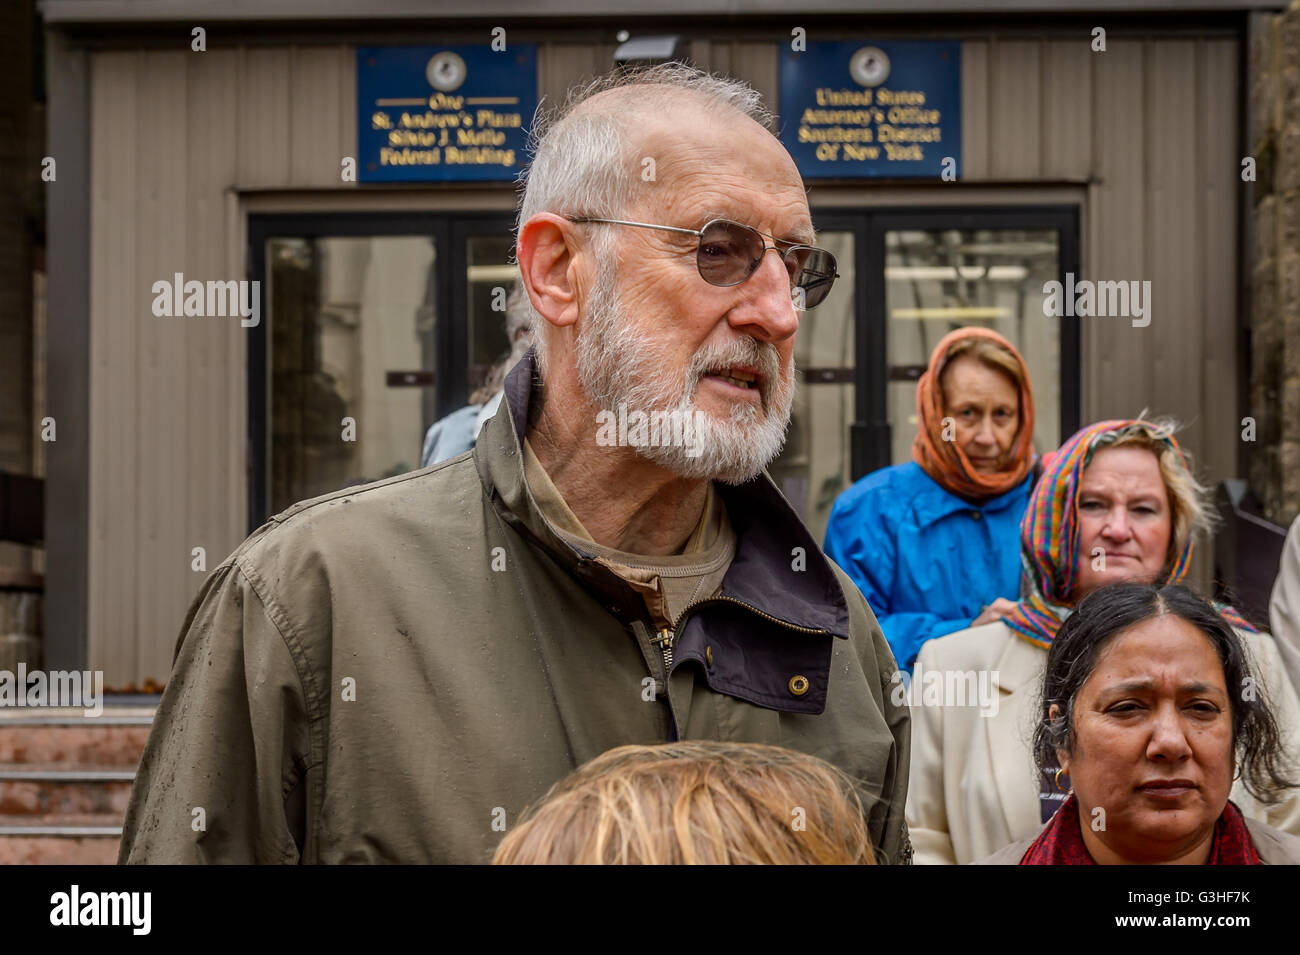 Actor and activist, James Cromwell joining the press conference outside of the U.S. Attorney's office to discuss his involvement in the issue. (Photo by: Erik Mc Gregor/Pacific Press) Stock Photo